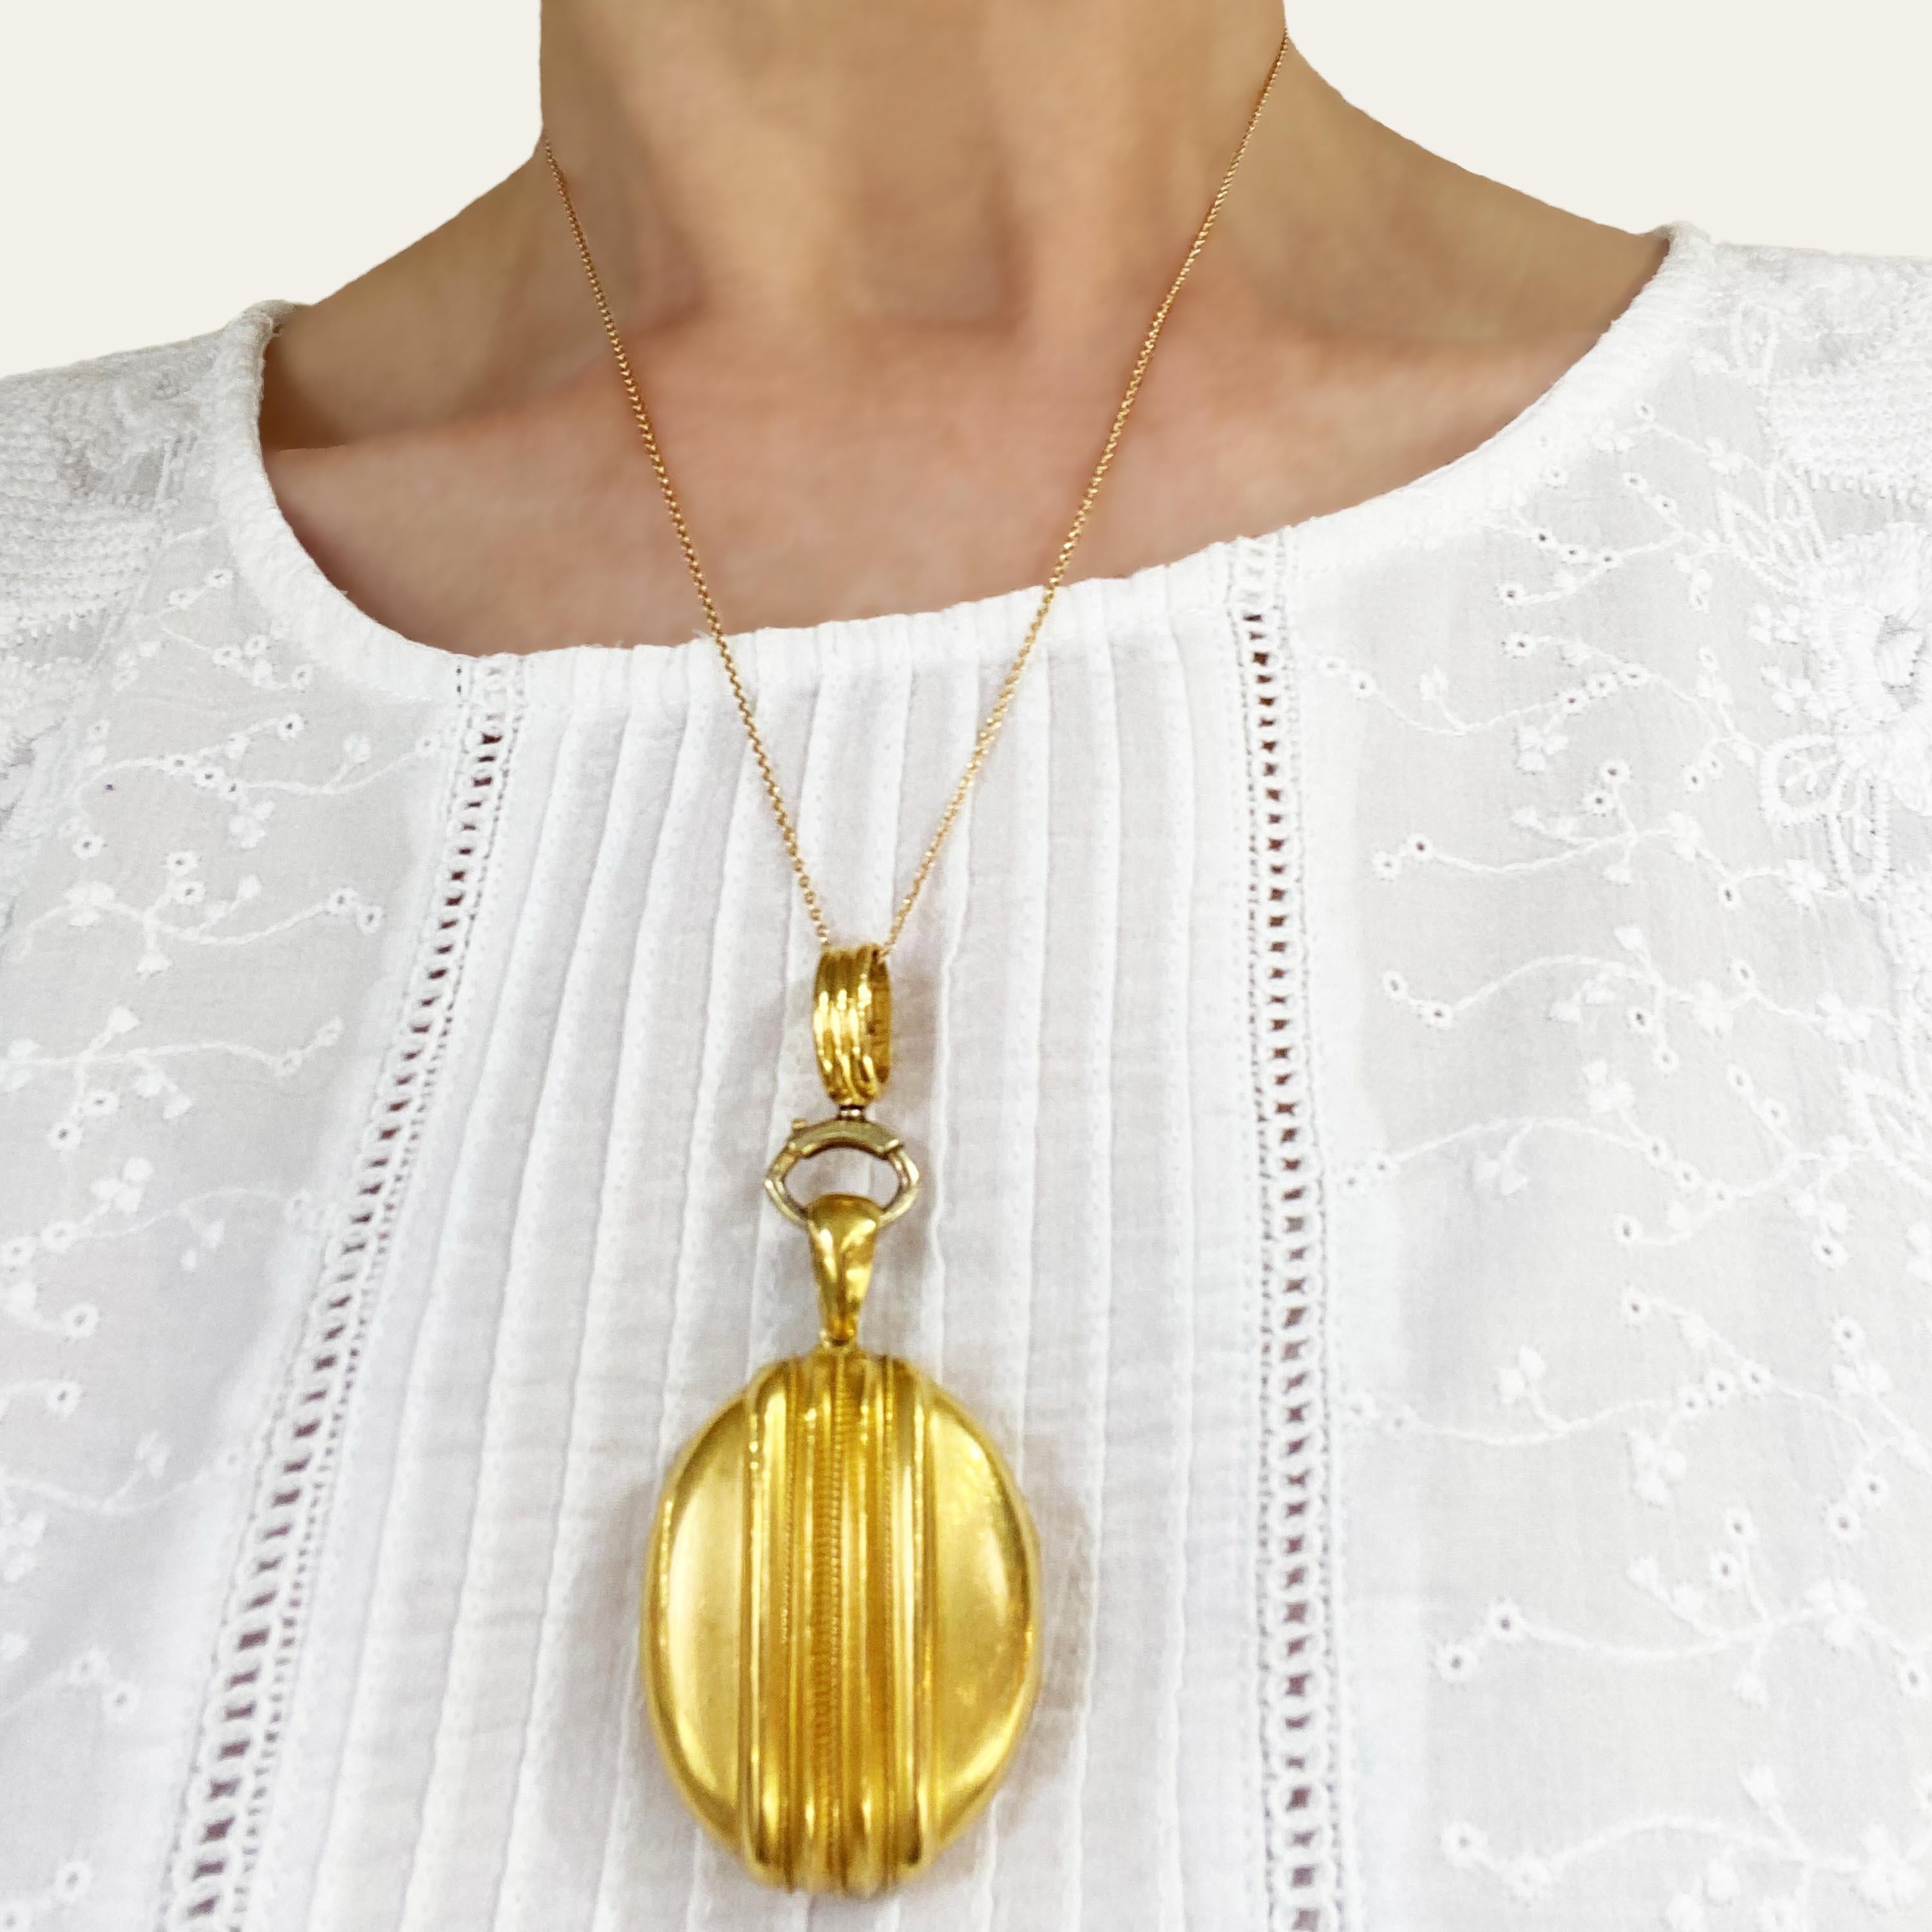 A Victorian gold locket, with an oval outline, with ridge and wire twist Etruscan style work on both sides, with a plain gold bail and a detachable ridged hanging loop, on a large bolt ring. The locket opens to reveal two picture lockets, with cream